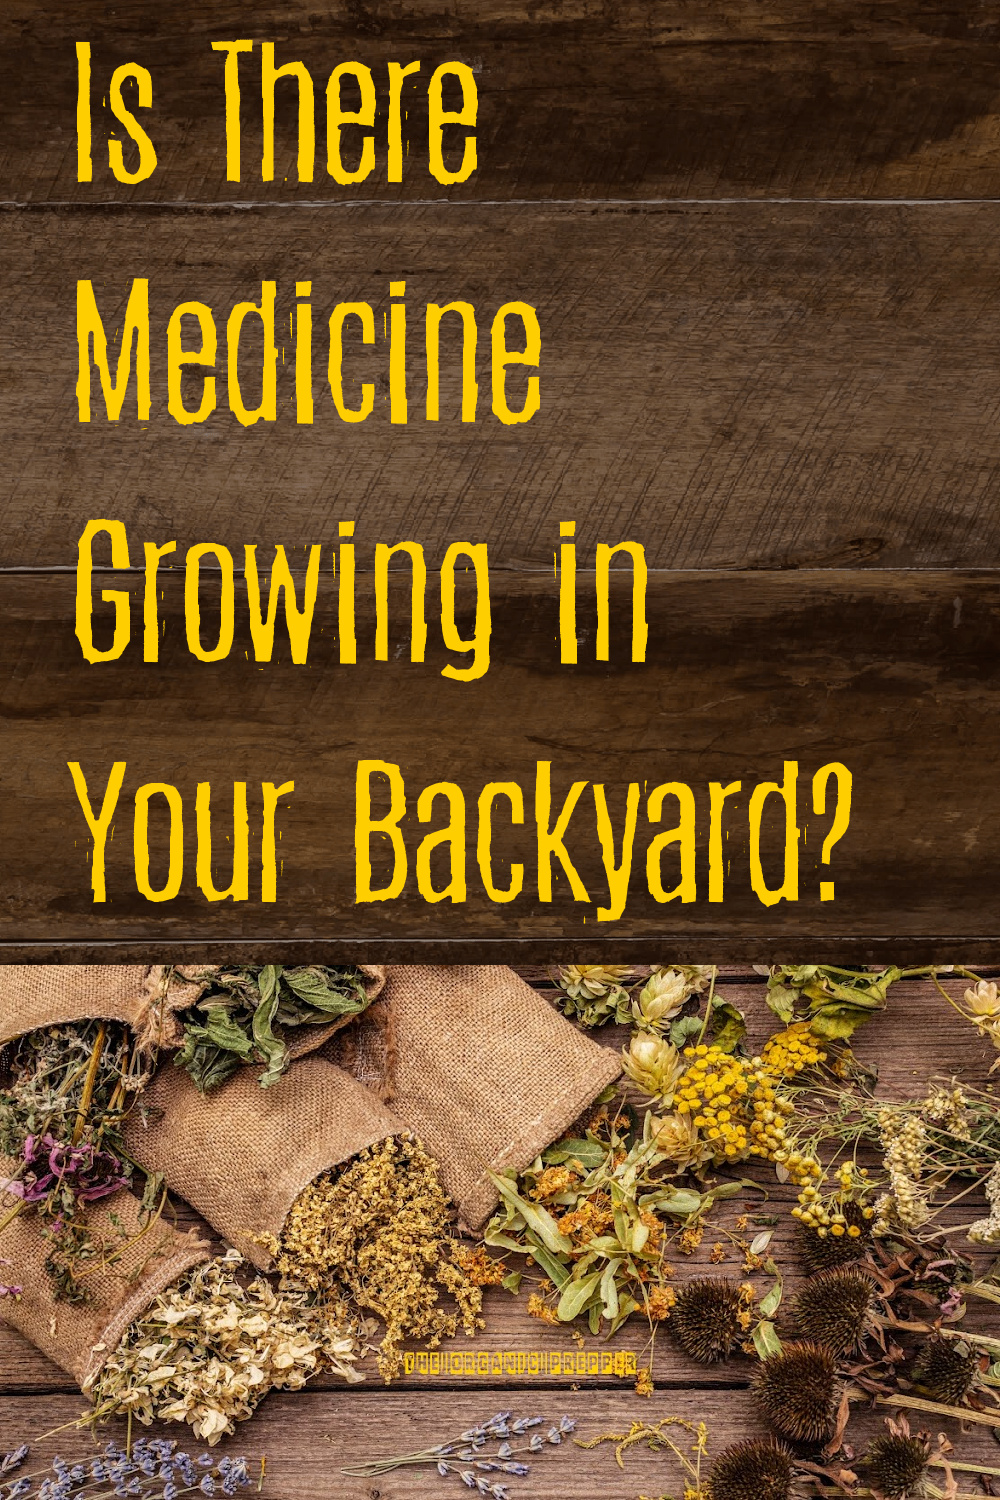 Is There Medicine Growing in Your Backyard?